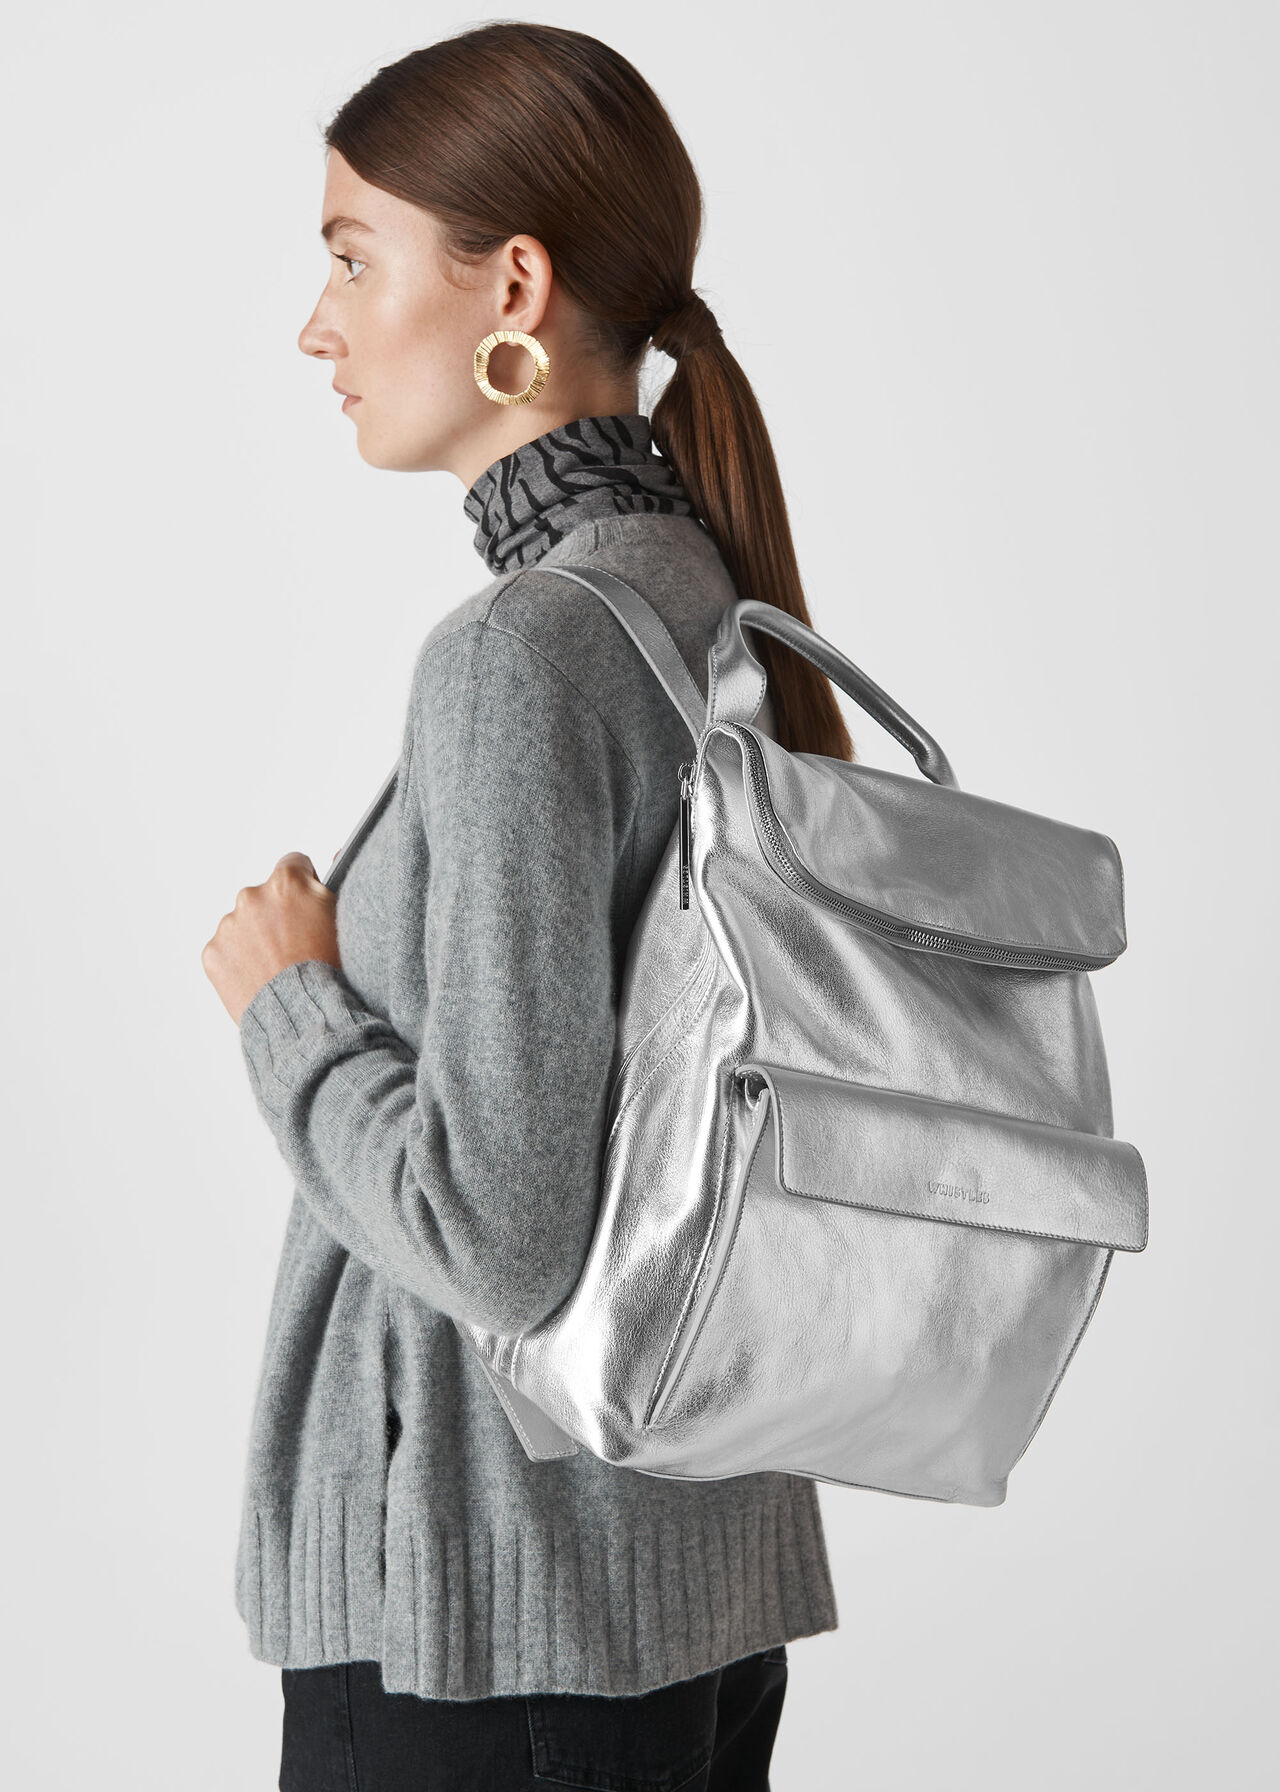 Silver Metallic Verity Backpack, WHISTLES